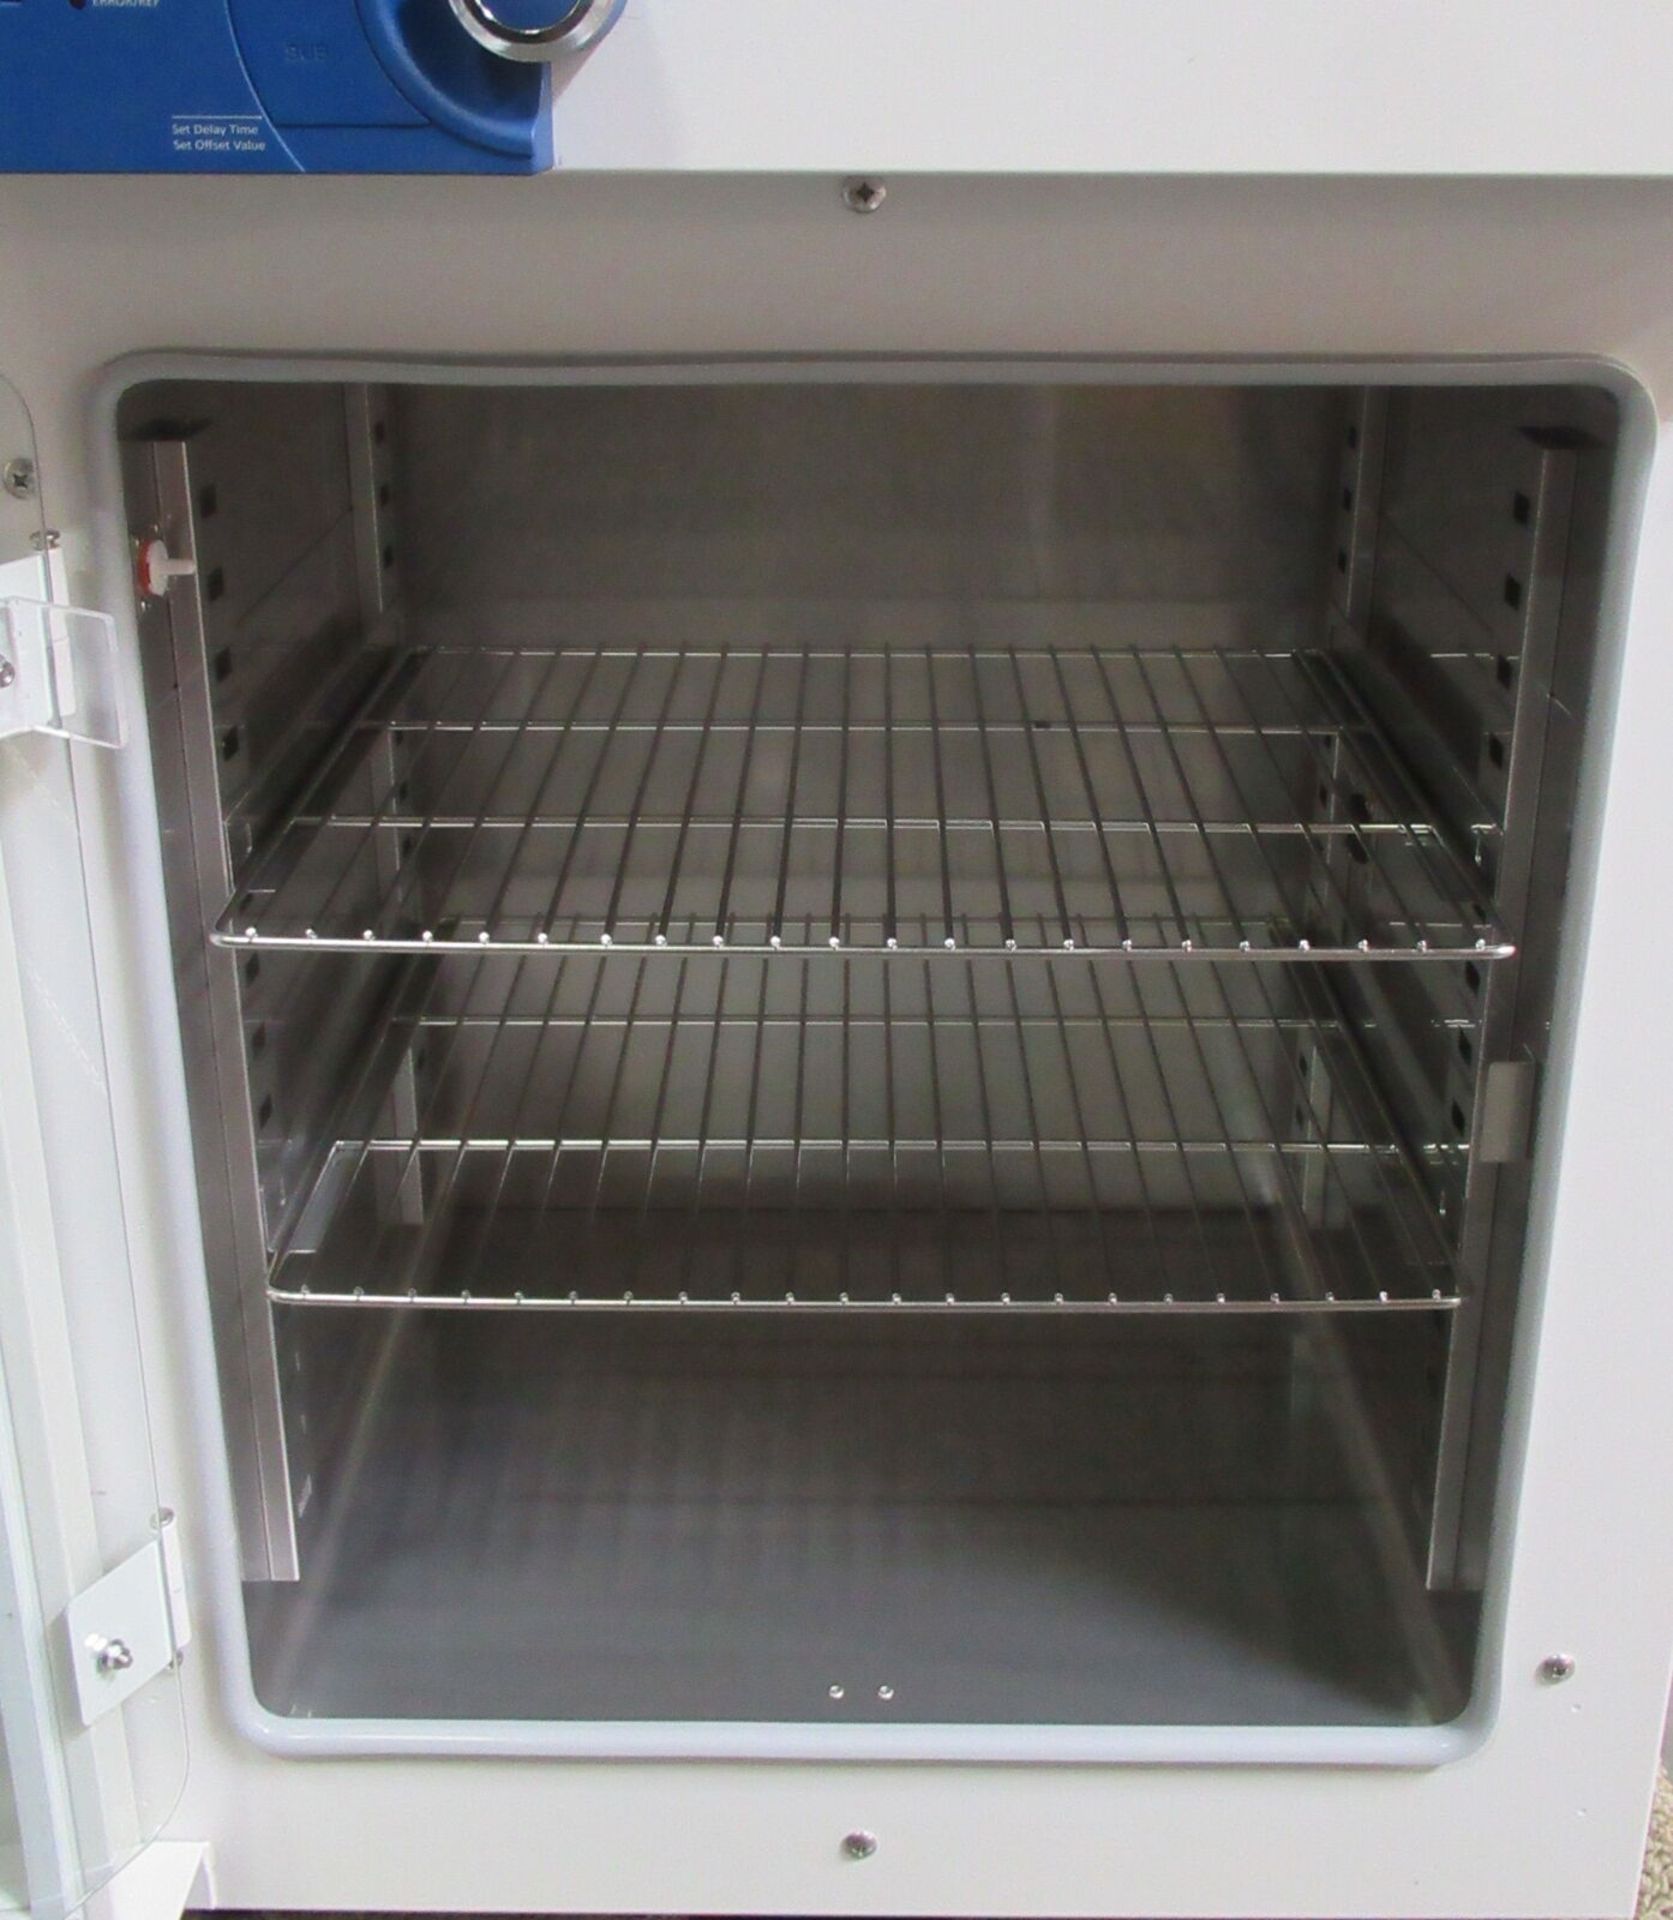 VWR 414005-132 Gravity Convection General Incubator - Image 4 of 8